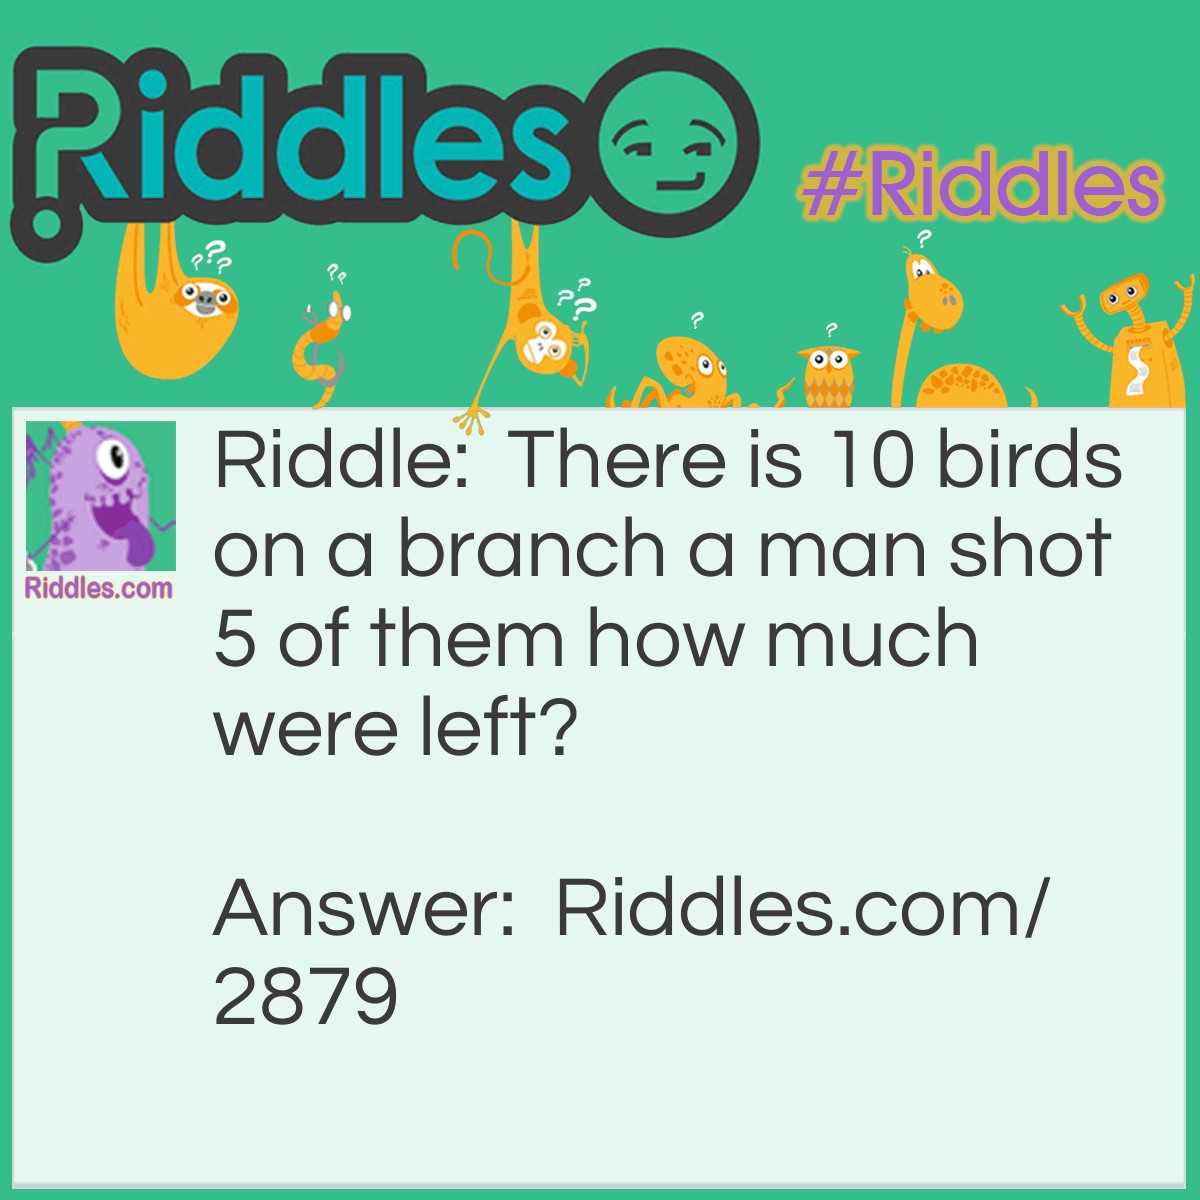 Riddle: There is 10 birds on a branch, a man shot 5 of them. How many were left? Answer: Zero, because when birds see someone coming or hear something they fly away.